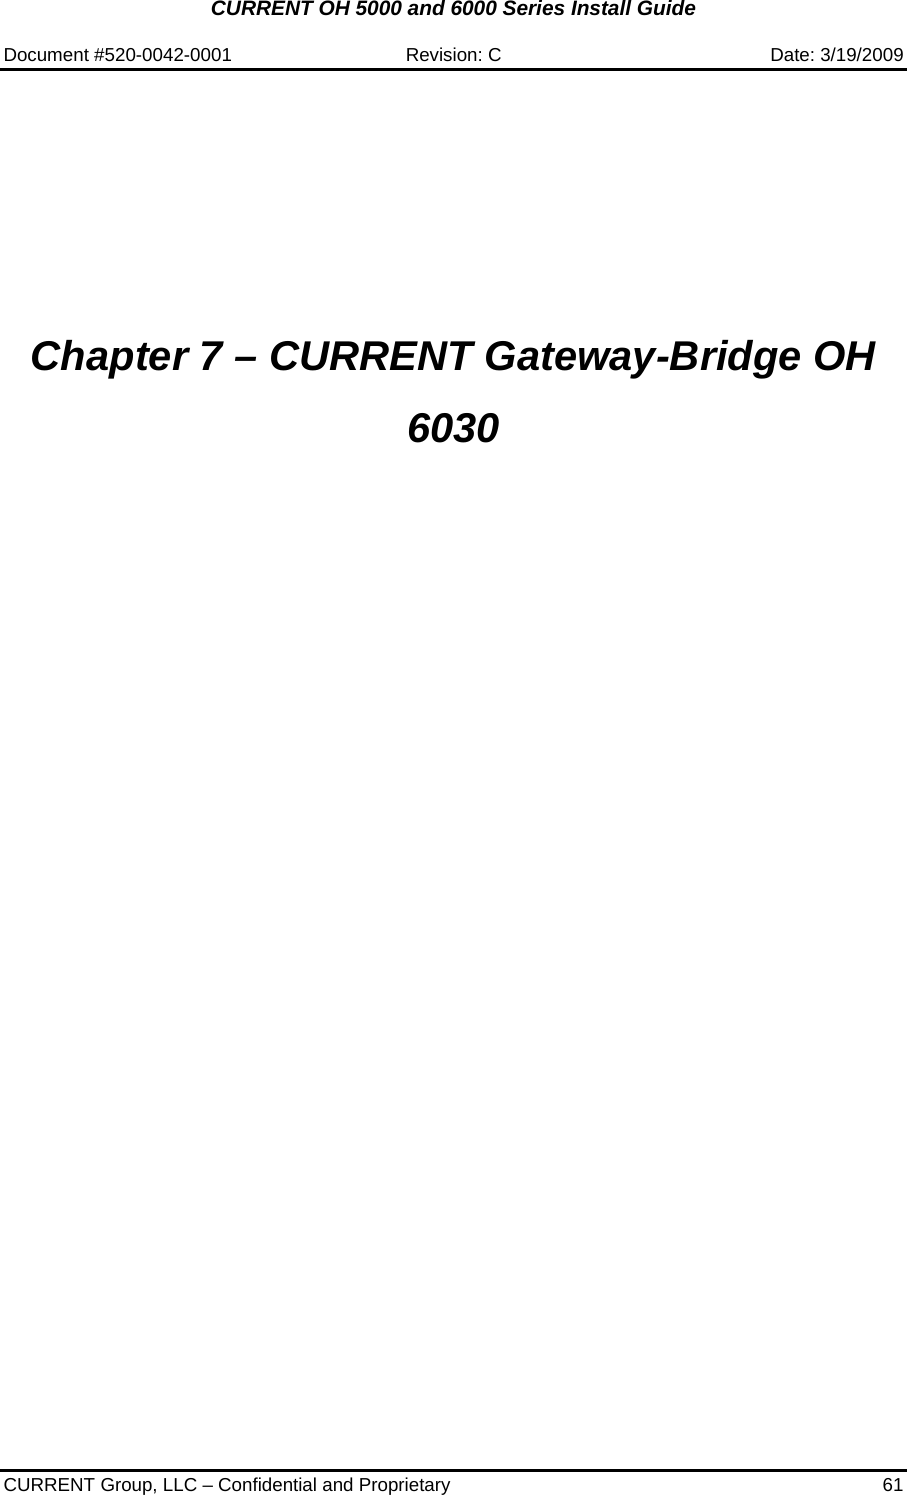 CURRENT OH 5000 and 6000 Series Install Guide  Document #520-0042-0001  Revision: C  Date: 3/19/2009  CURRENT Group, LLC – Confidential and Proprietary  61          Chapter 7 – CURRENT Gateway-Bridge OH 6030      